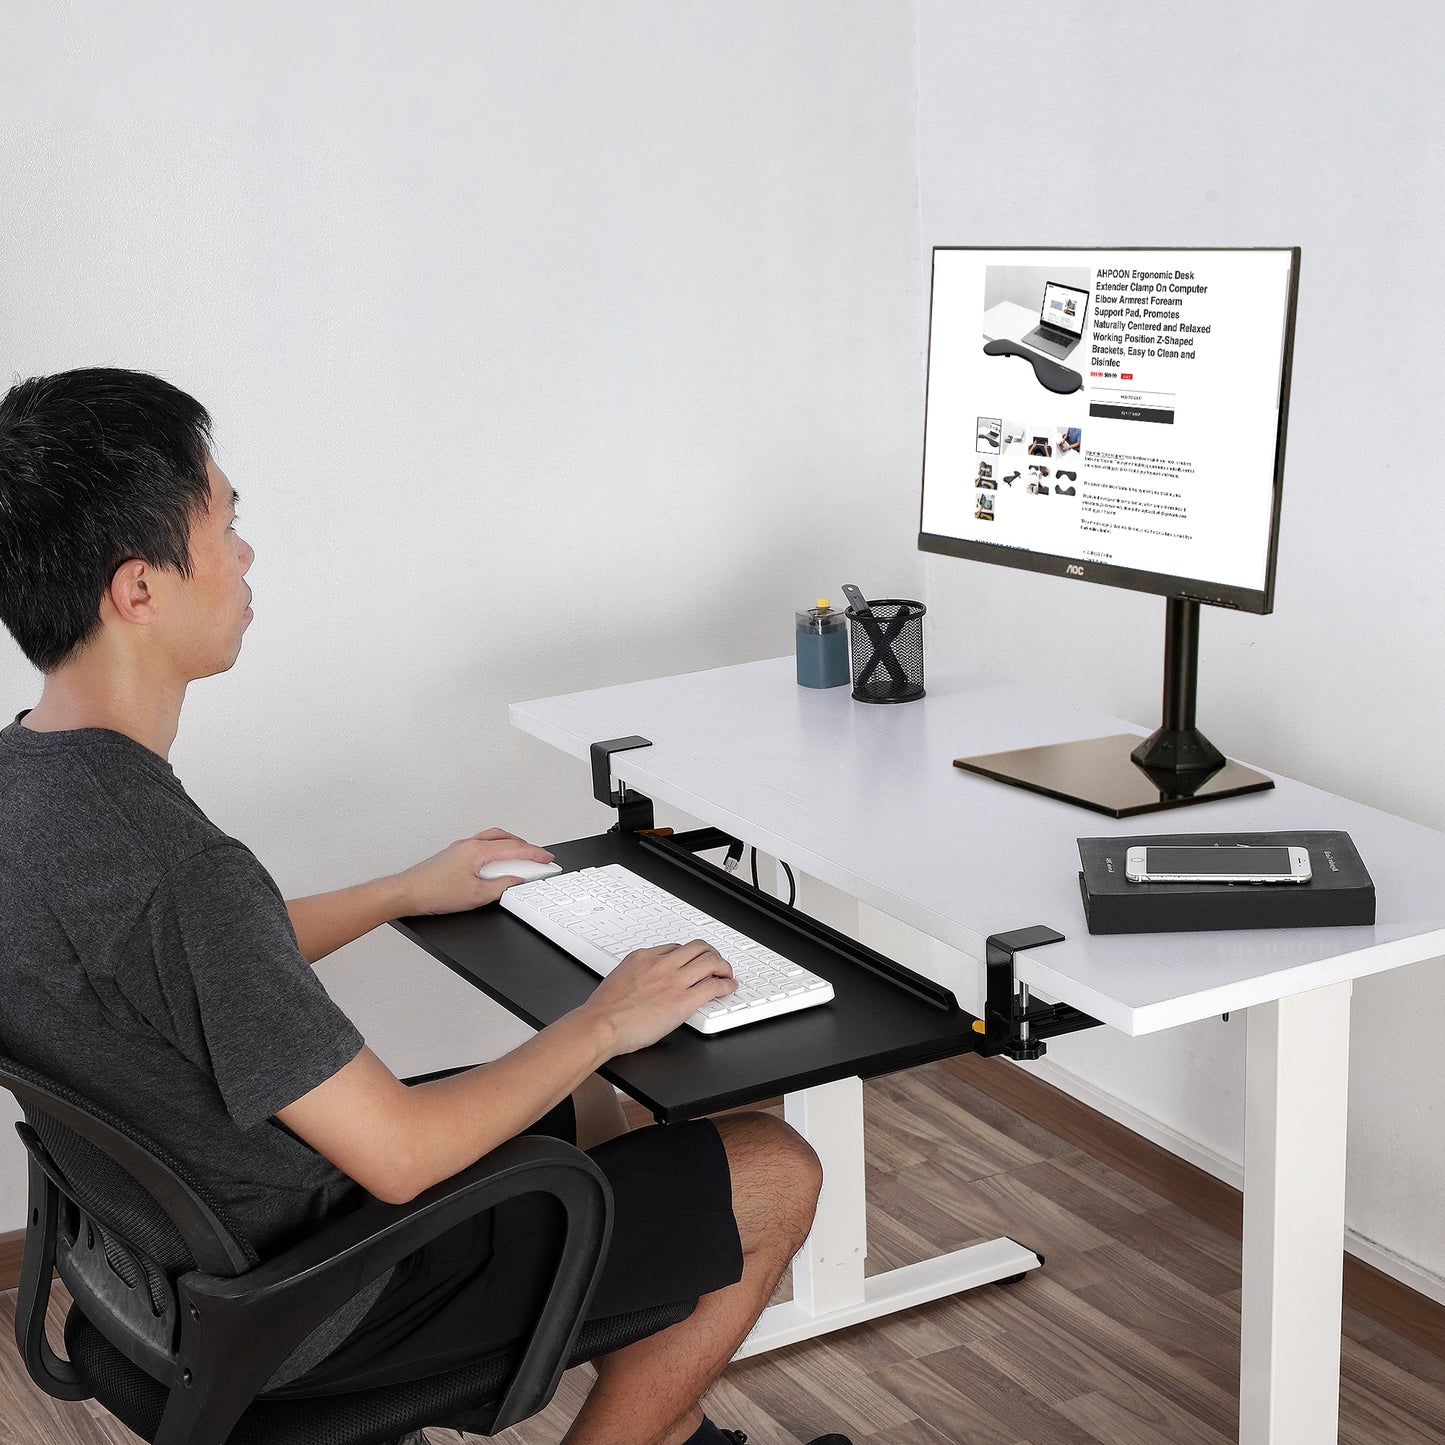 AHPOON Large Keyboard Tray Under Desk Pull Out with Extra Sturdy C Clamp Mount System, Slide-Out Platform Computer Drawer for Typing